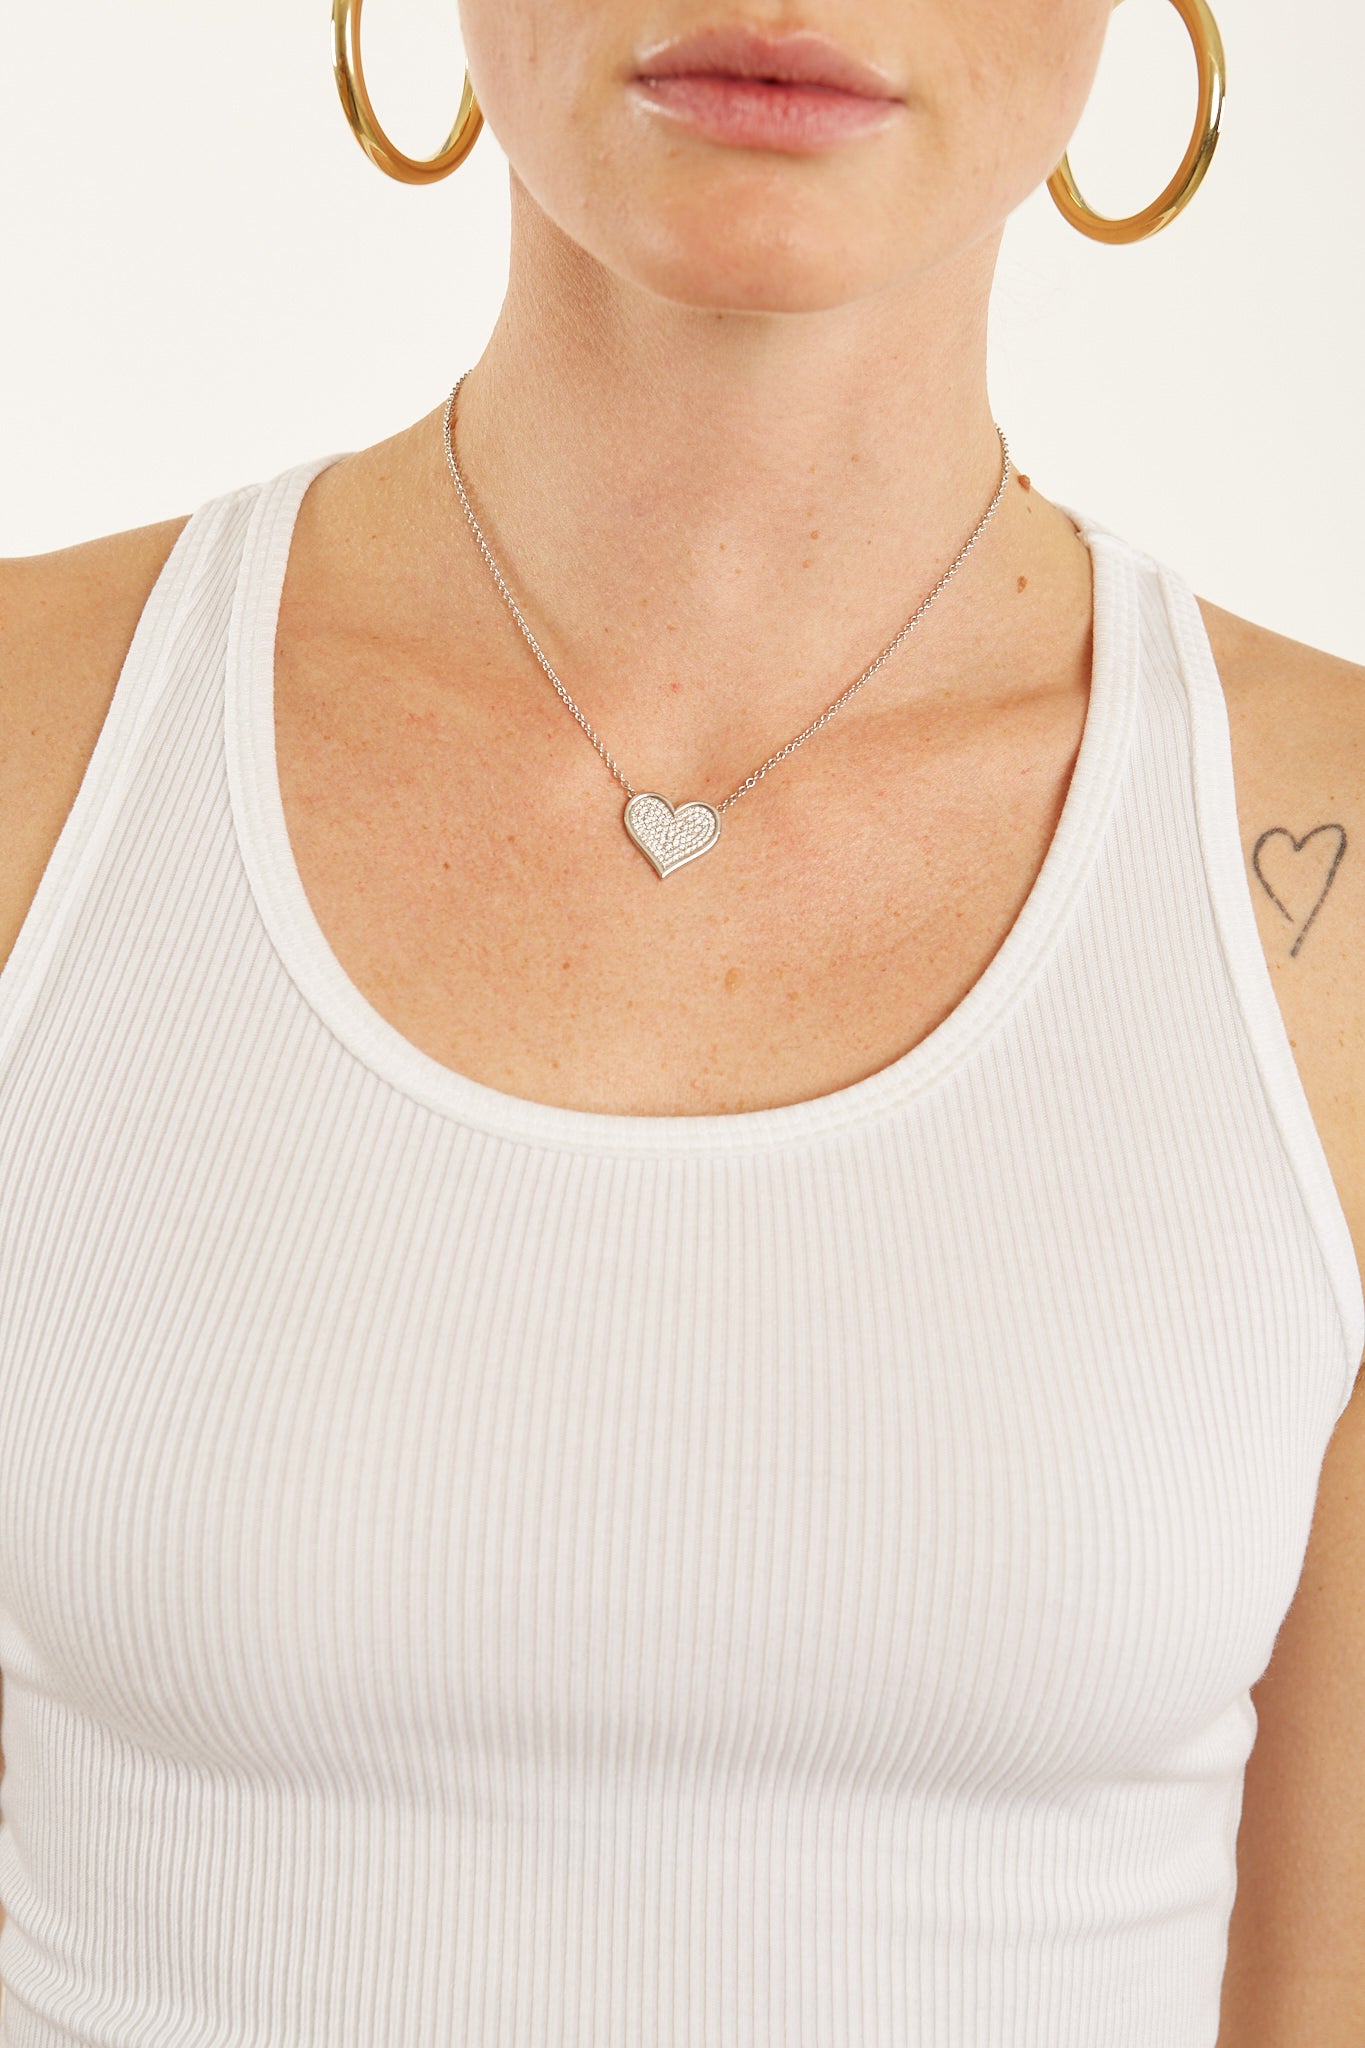 White Gold Large Diamond Pave Heart Necklace